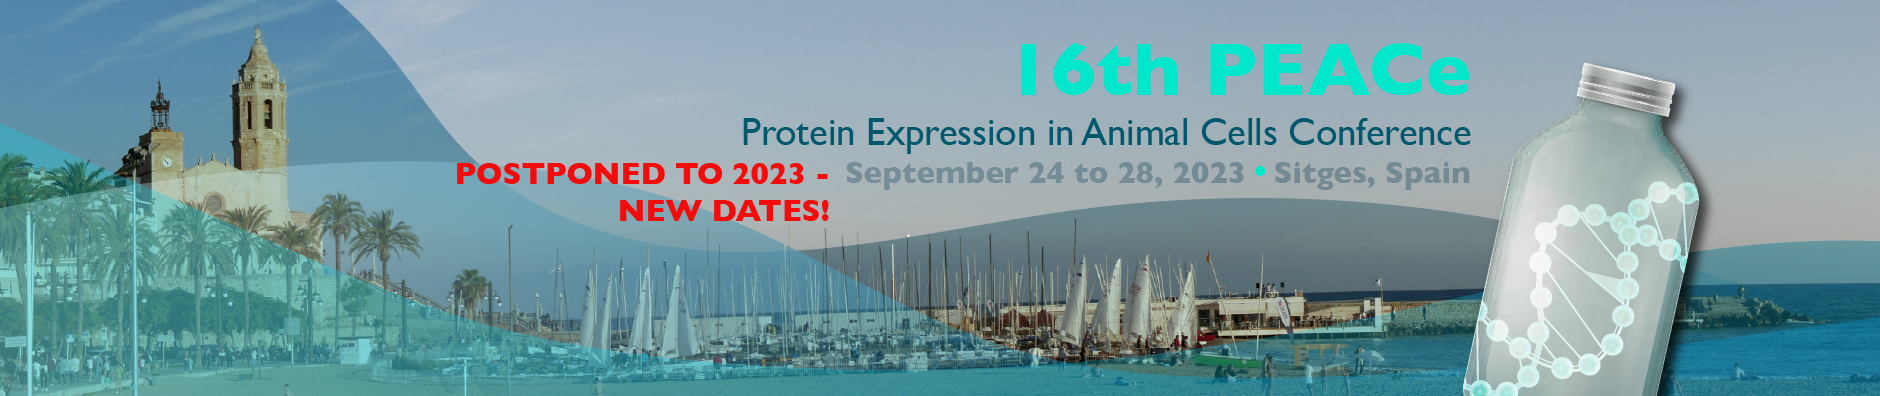 16th Conference on Protein Expression in Animal Cells - September 24-28, 2023